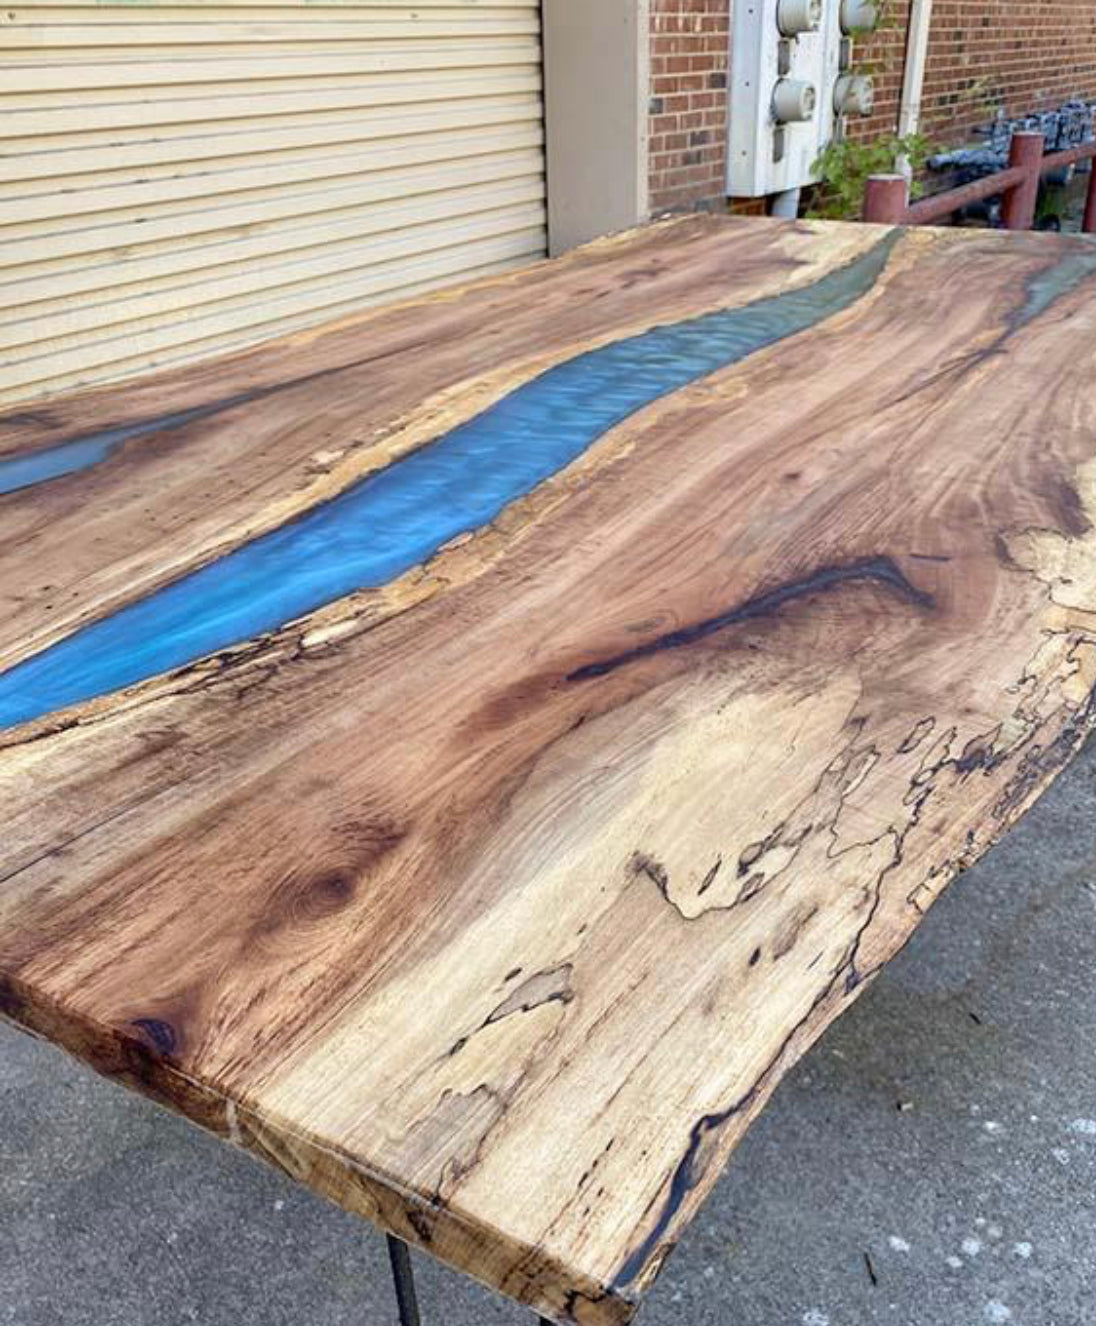 1" Thick Planed Pecan Live Edge Slabs for Charcuterie Boards, Furniture, Tables and Bar Tops, Shelves, and More - Kiln Dried